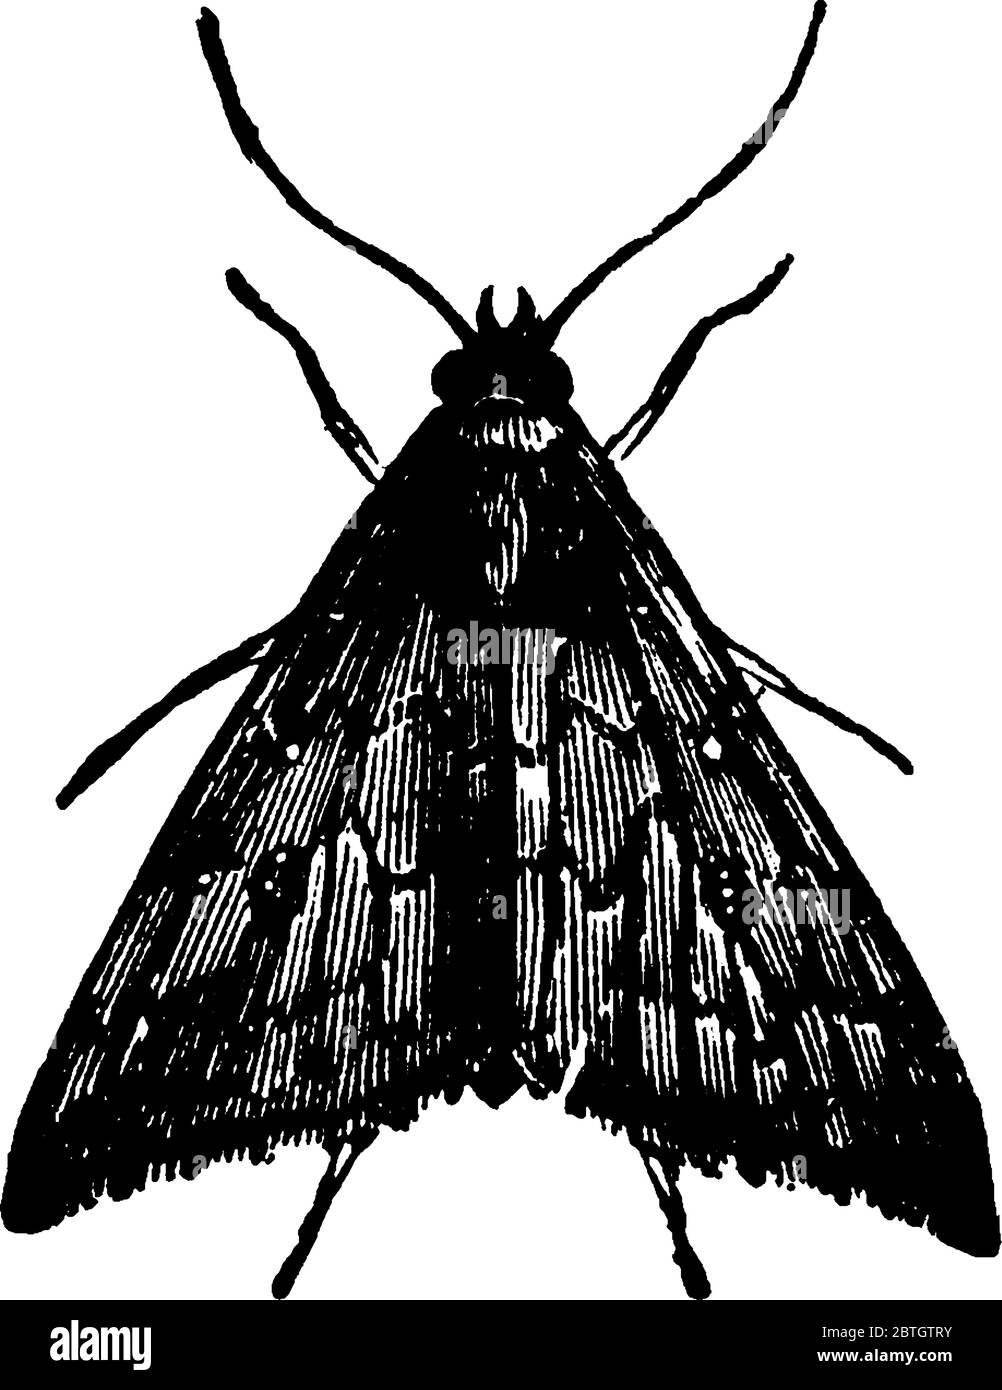 Depicts the Owlet moth, Aletia argillacea species, at rest, showing its large head and wings mottled with markings, vintage line drawing or engraving Stock Vector